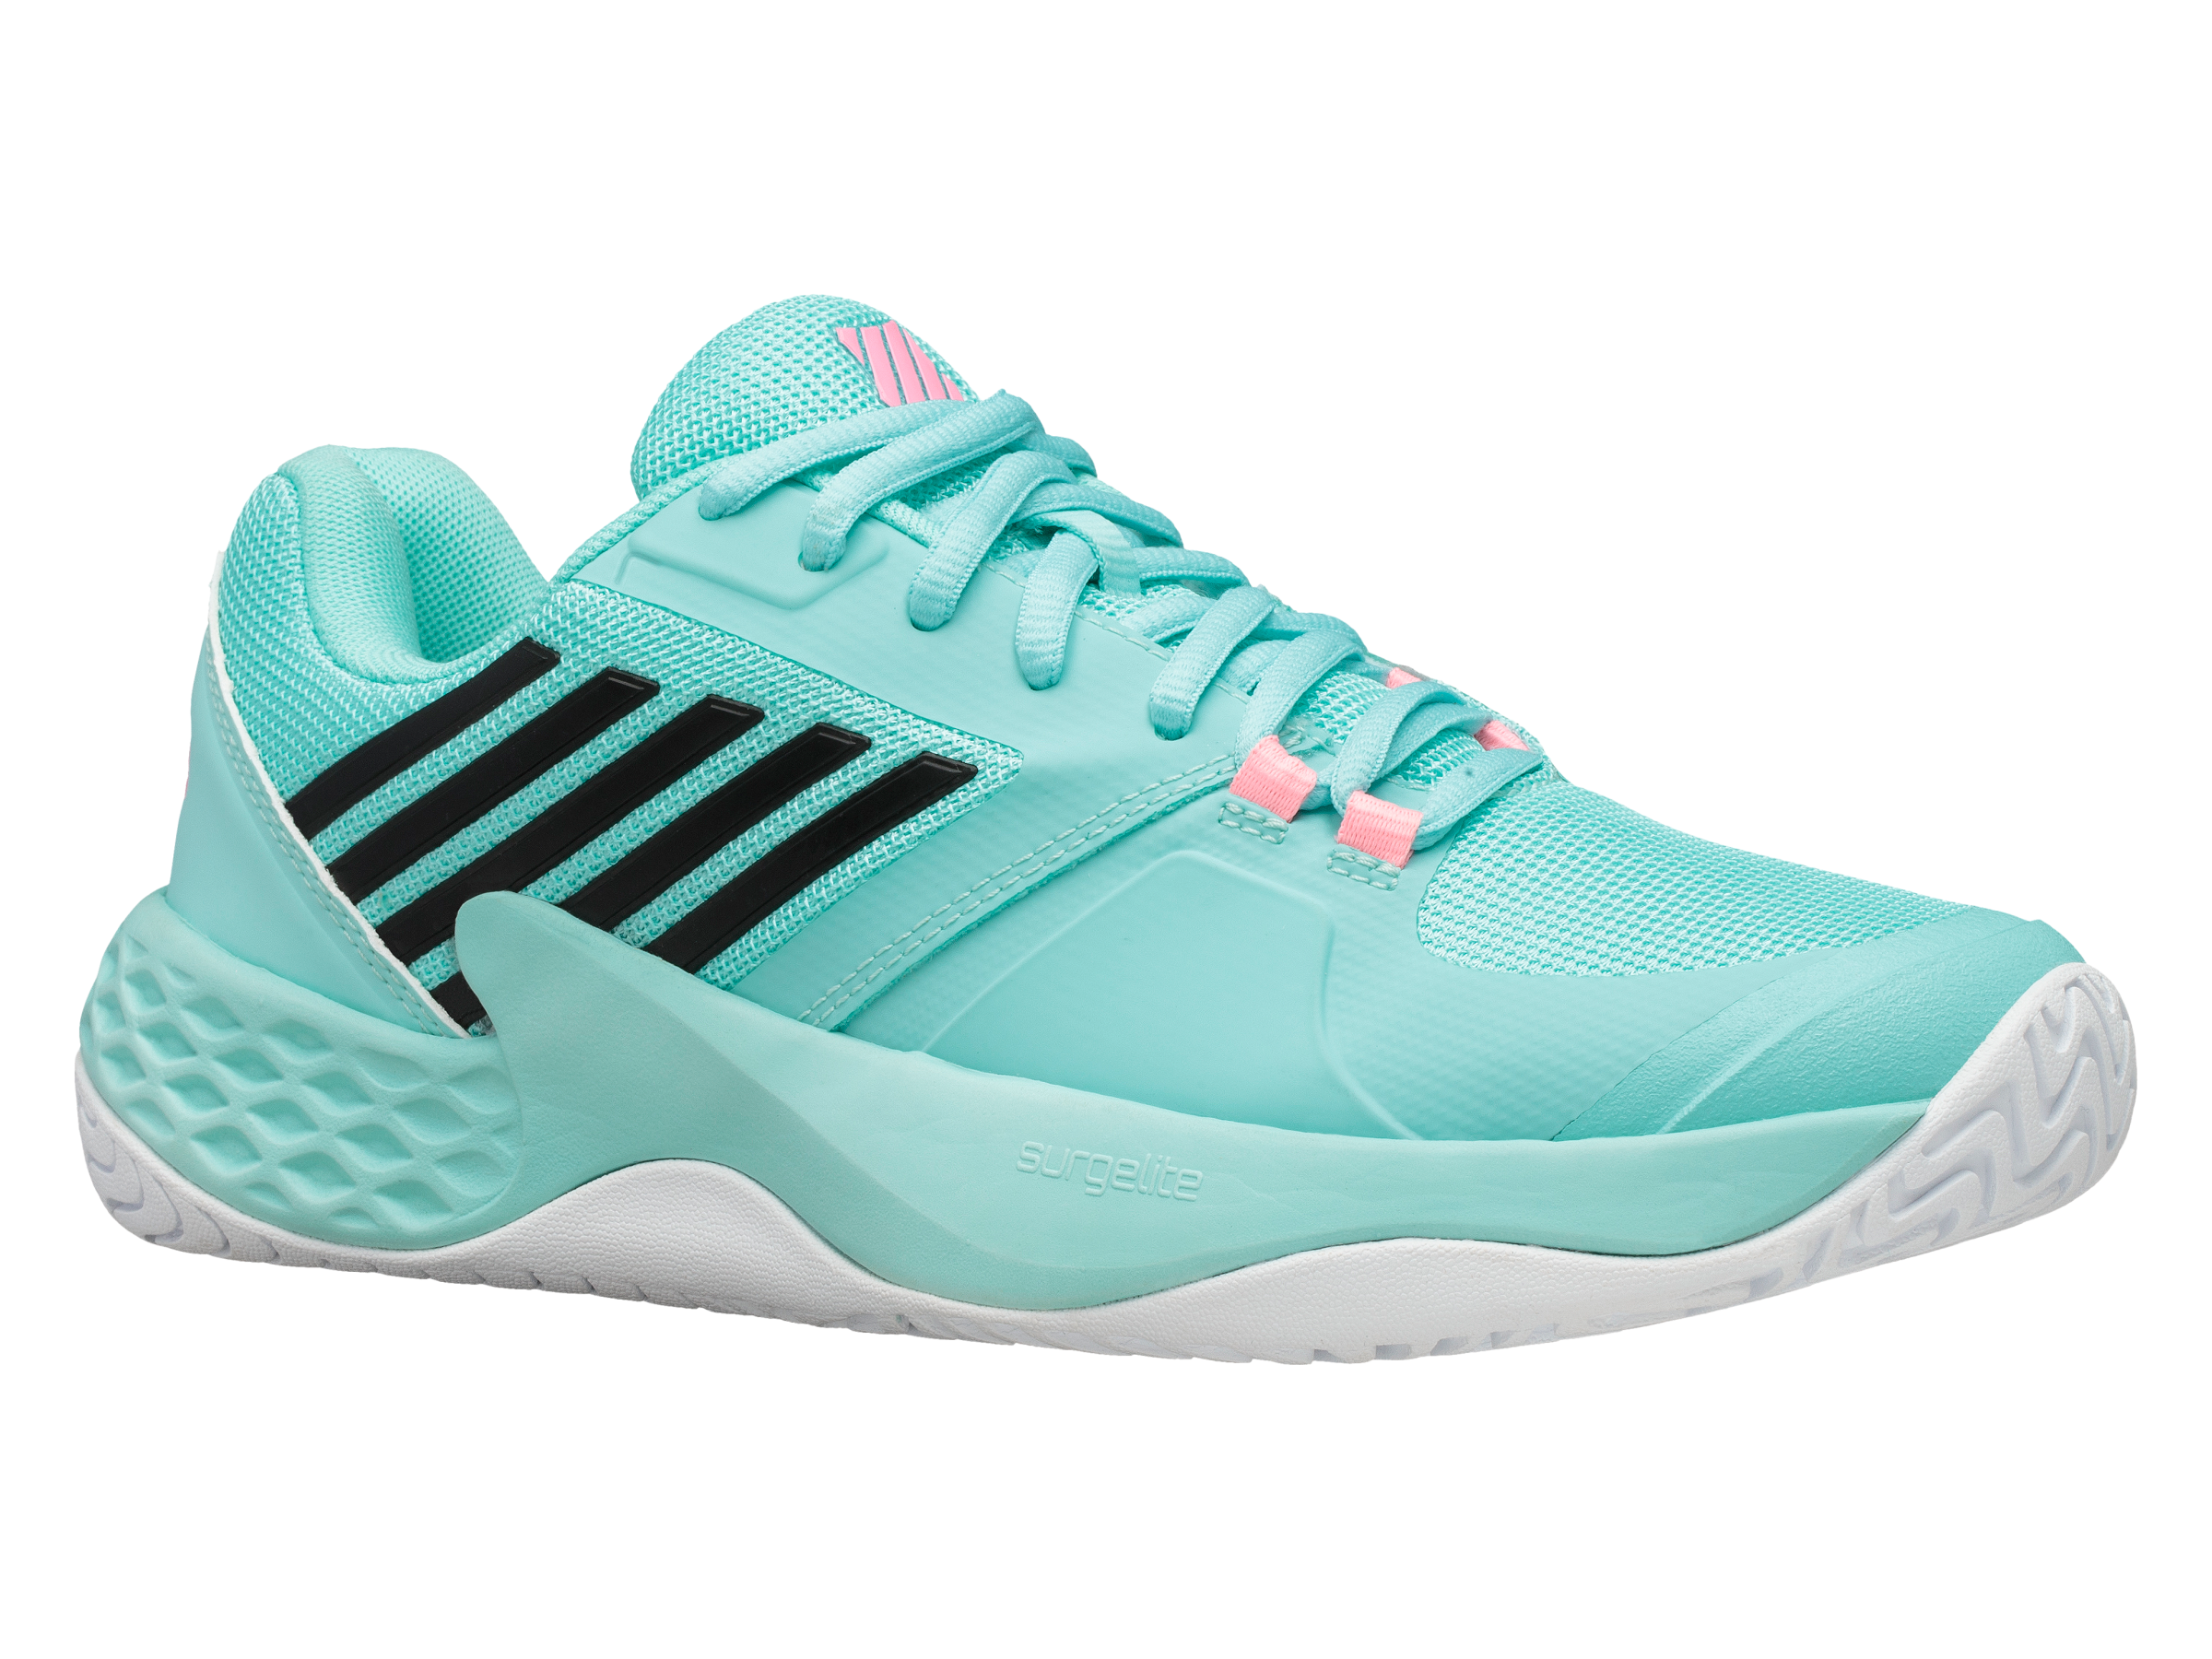 teal womens tennis shoes